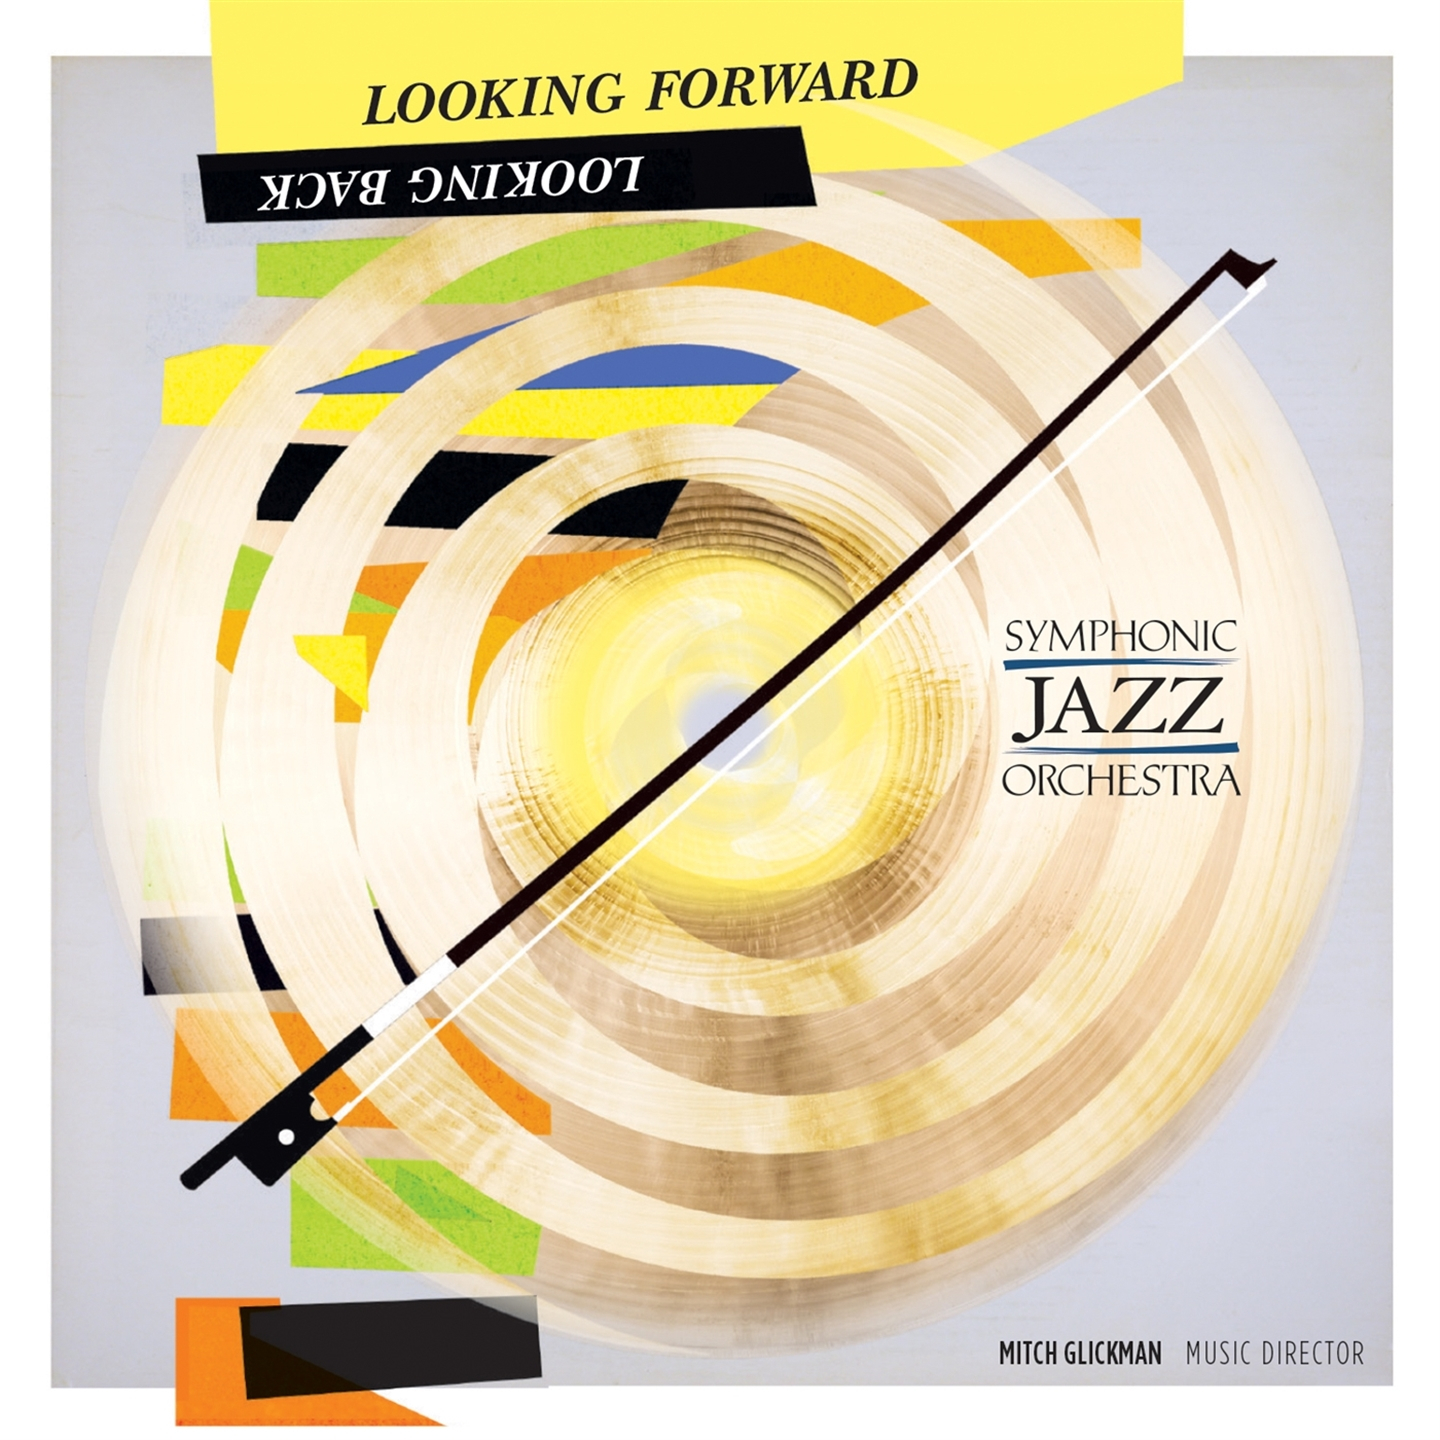 Symphonic Jazz Orchestra - Looking Forward, Looking Back - Photo 1 sur 1